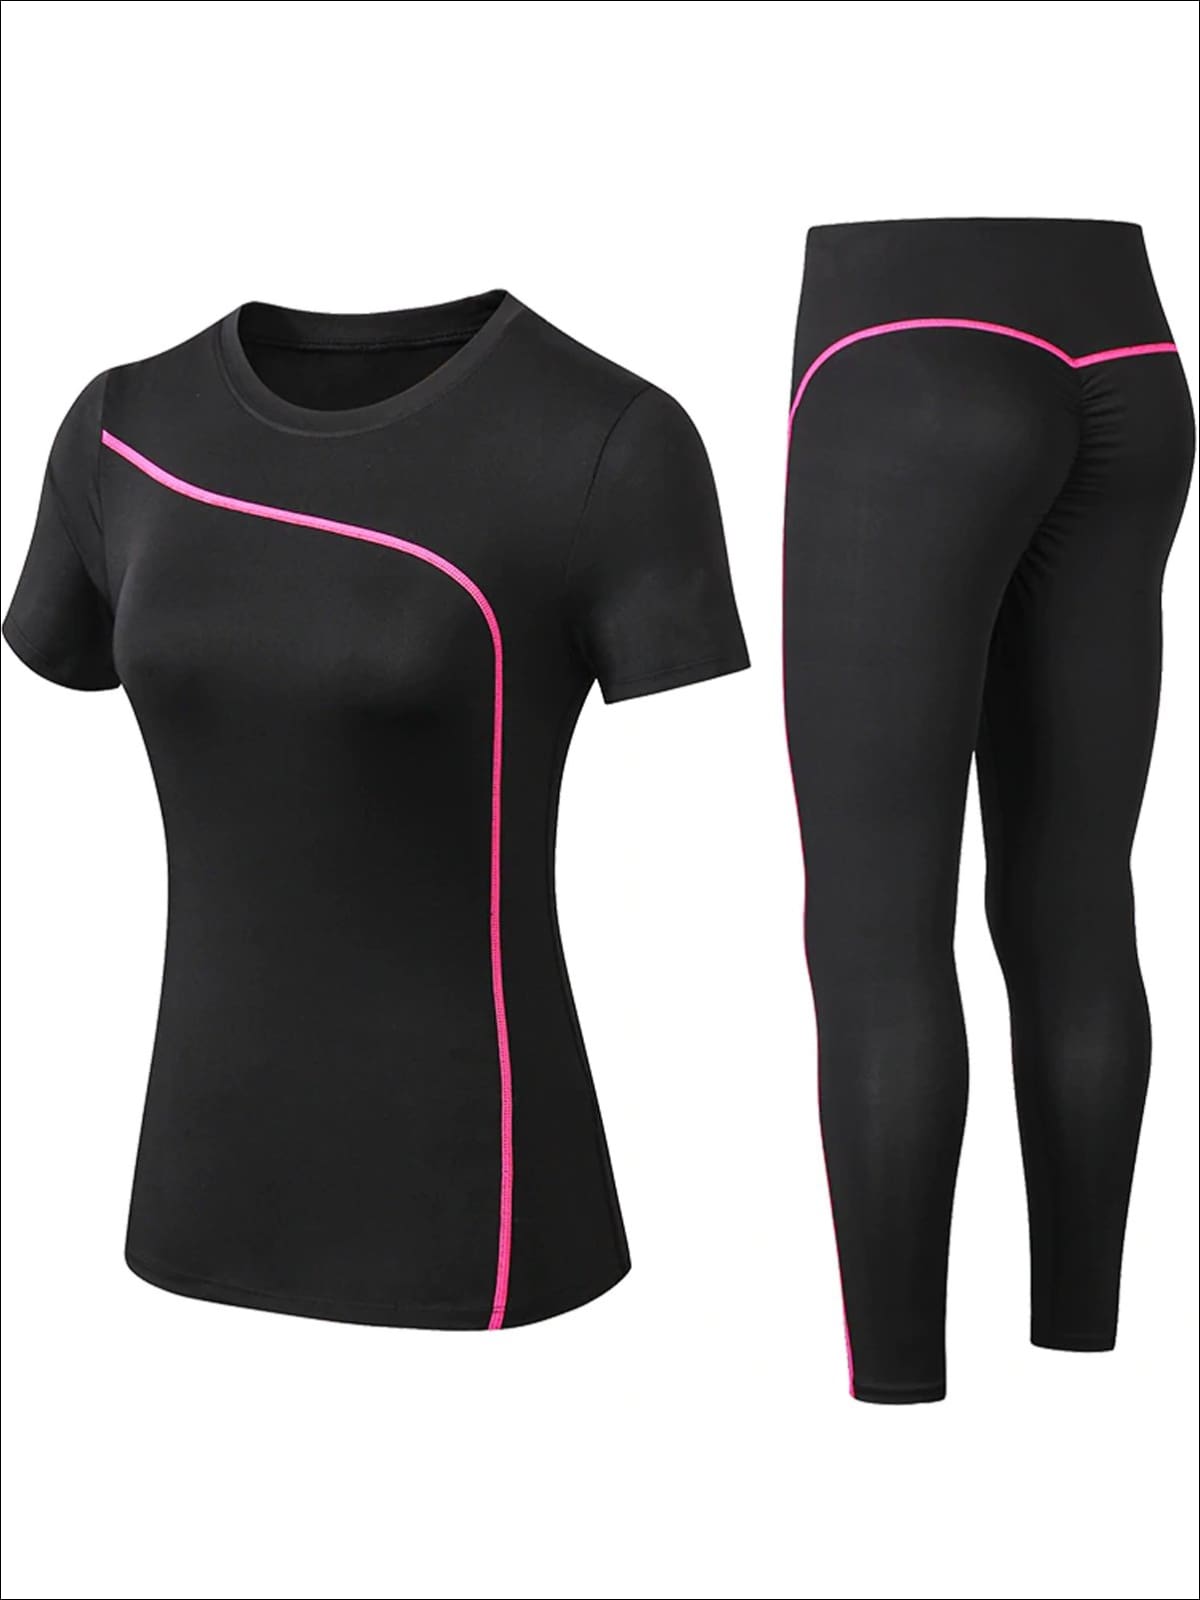 Womens Black Contrast Piping Workout Top & Leggings Set - Pink / S - Womens Activewear